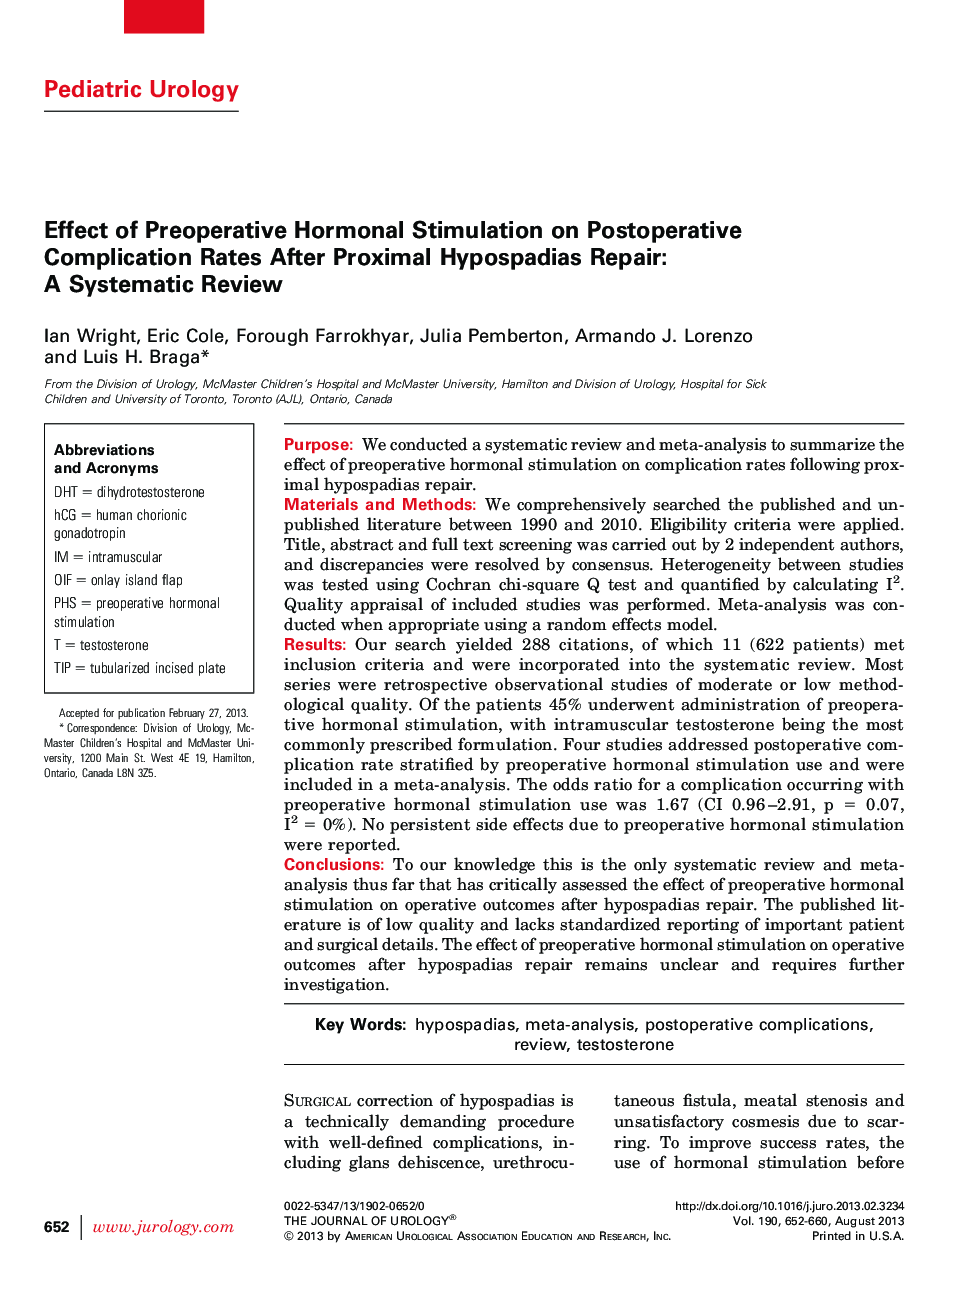 Effect of Preoperative Hormonal Stimulation on Postoperative Complication Rates After Proximal Hypospadias Repair: A Systematic Review